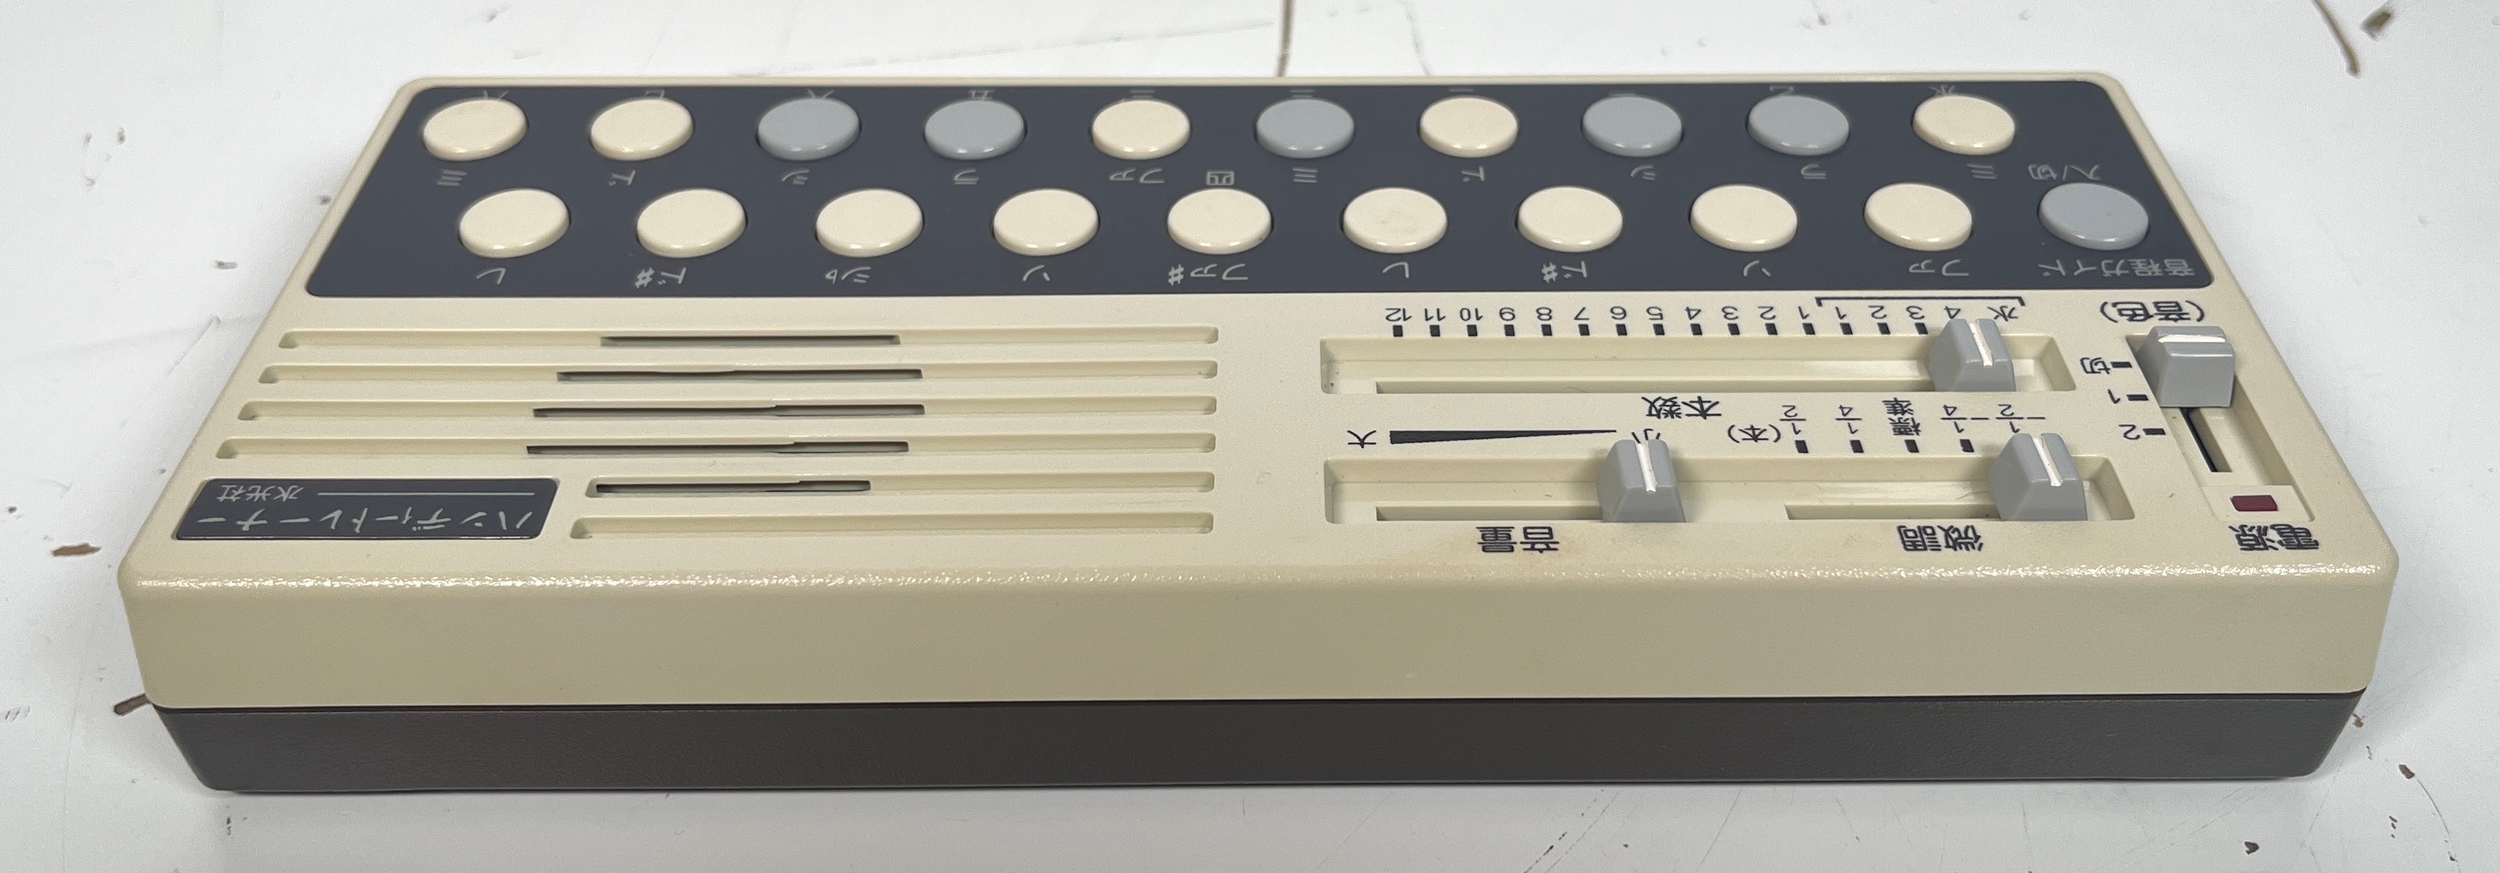 Suiko ST-40 Poetry Trainer, Boxed Pocket version of the inspiring Japanese synth. (C) Tested. Powers - Image 5 of 6